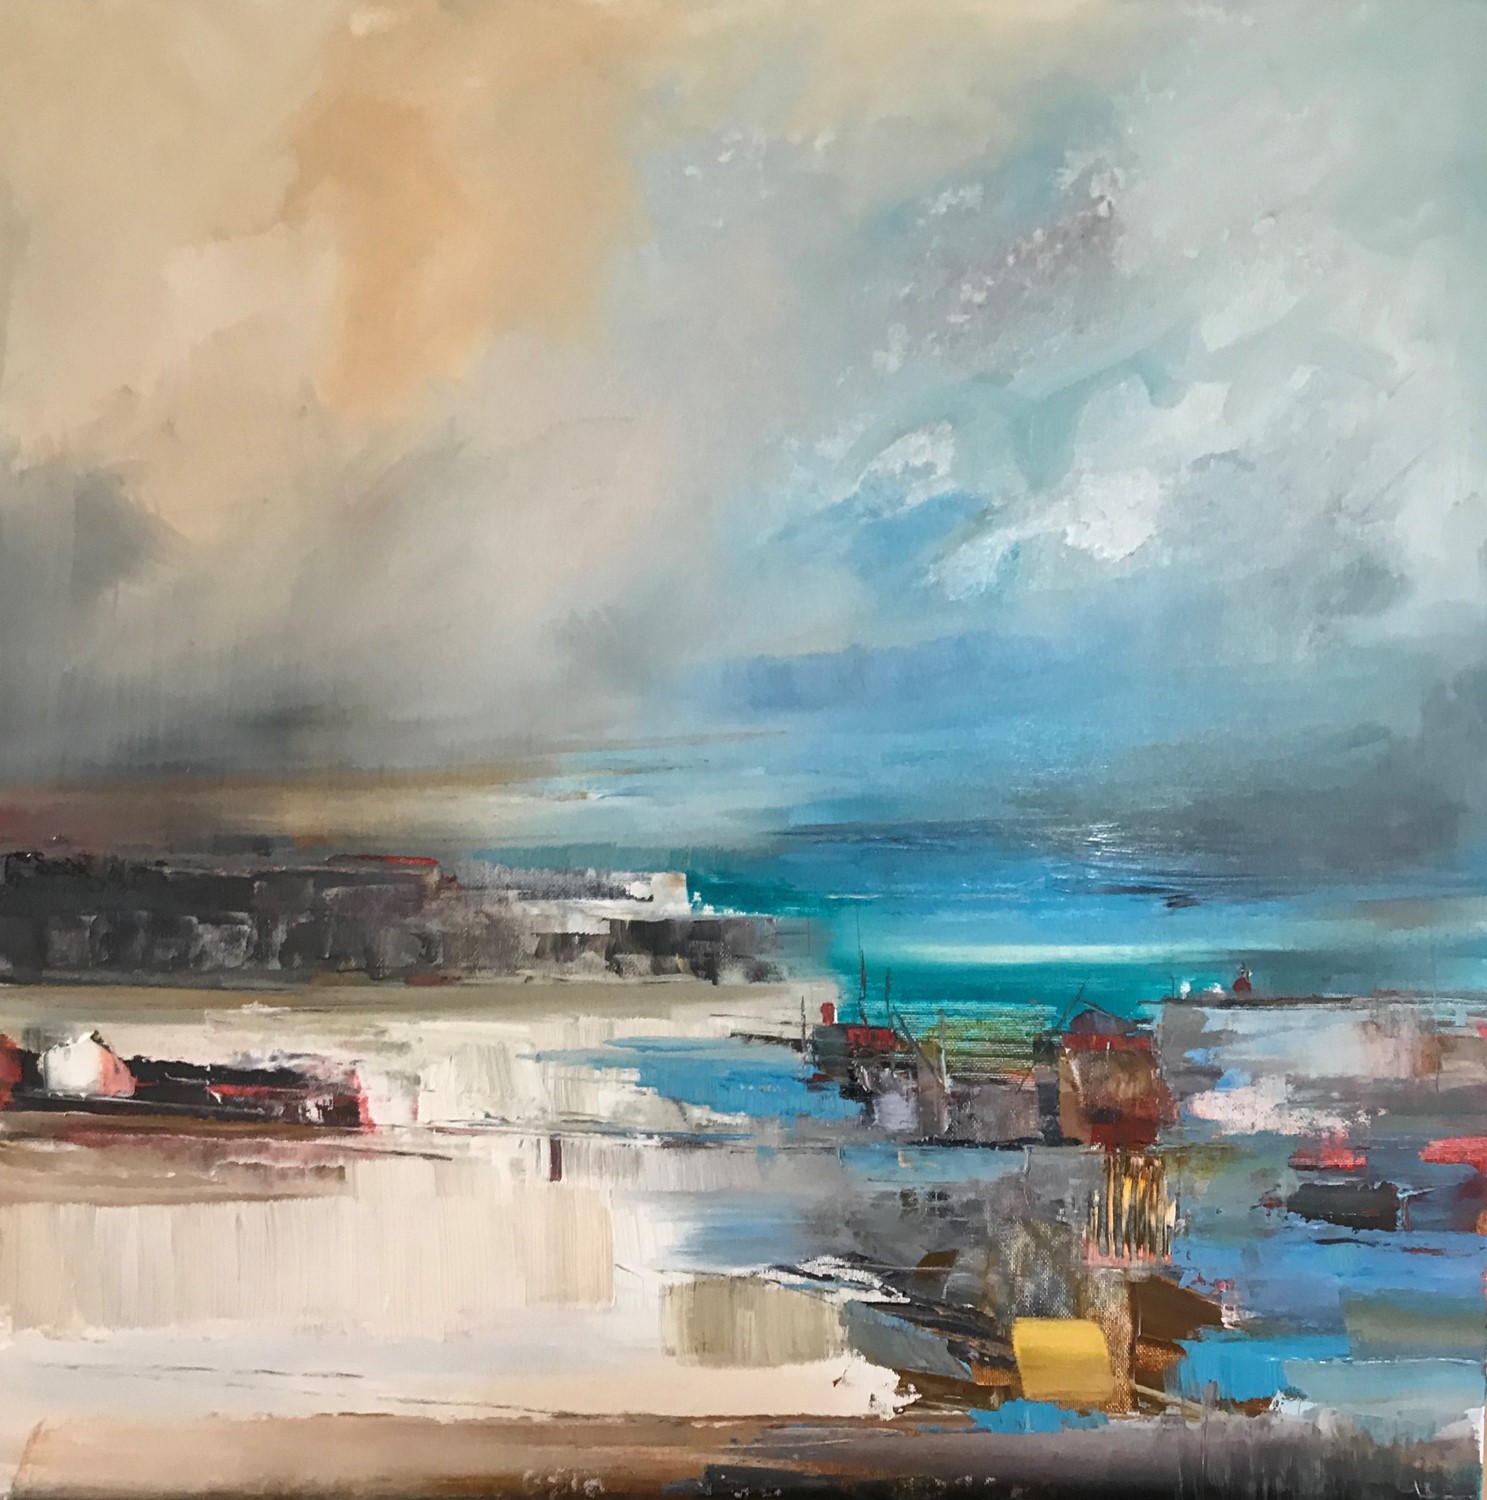 'To Port' by artist Rosanne Barr